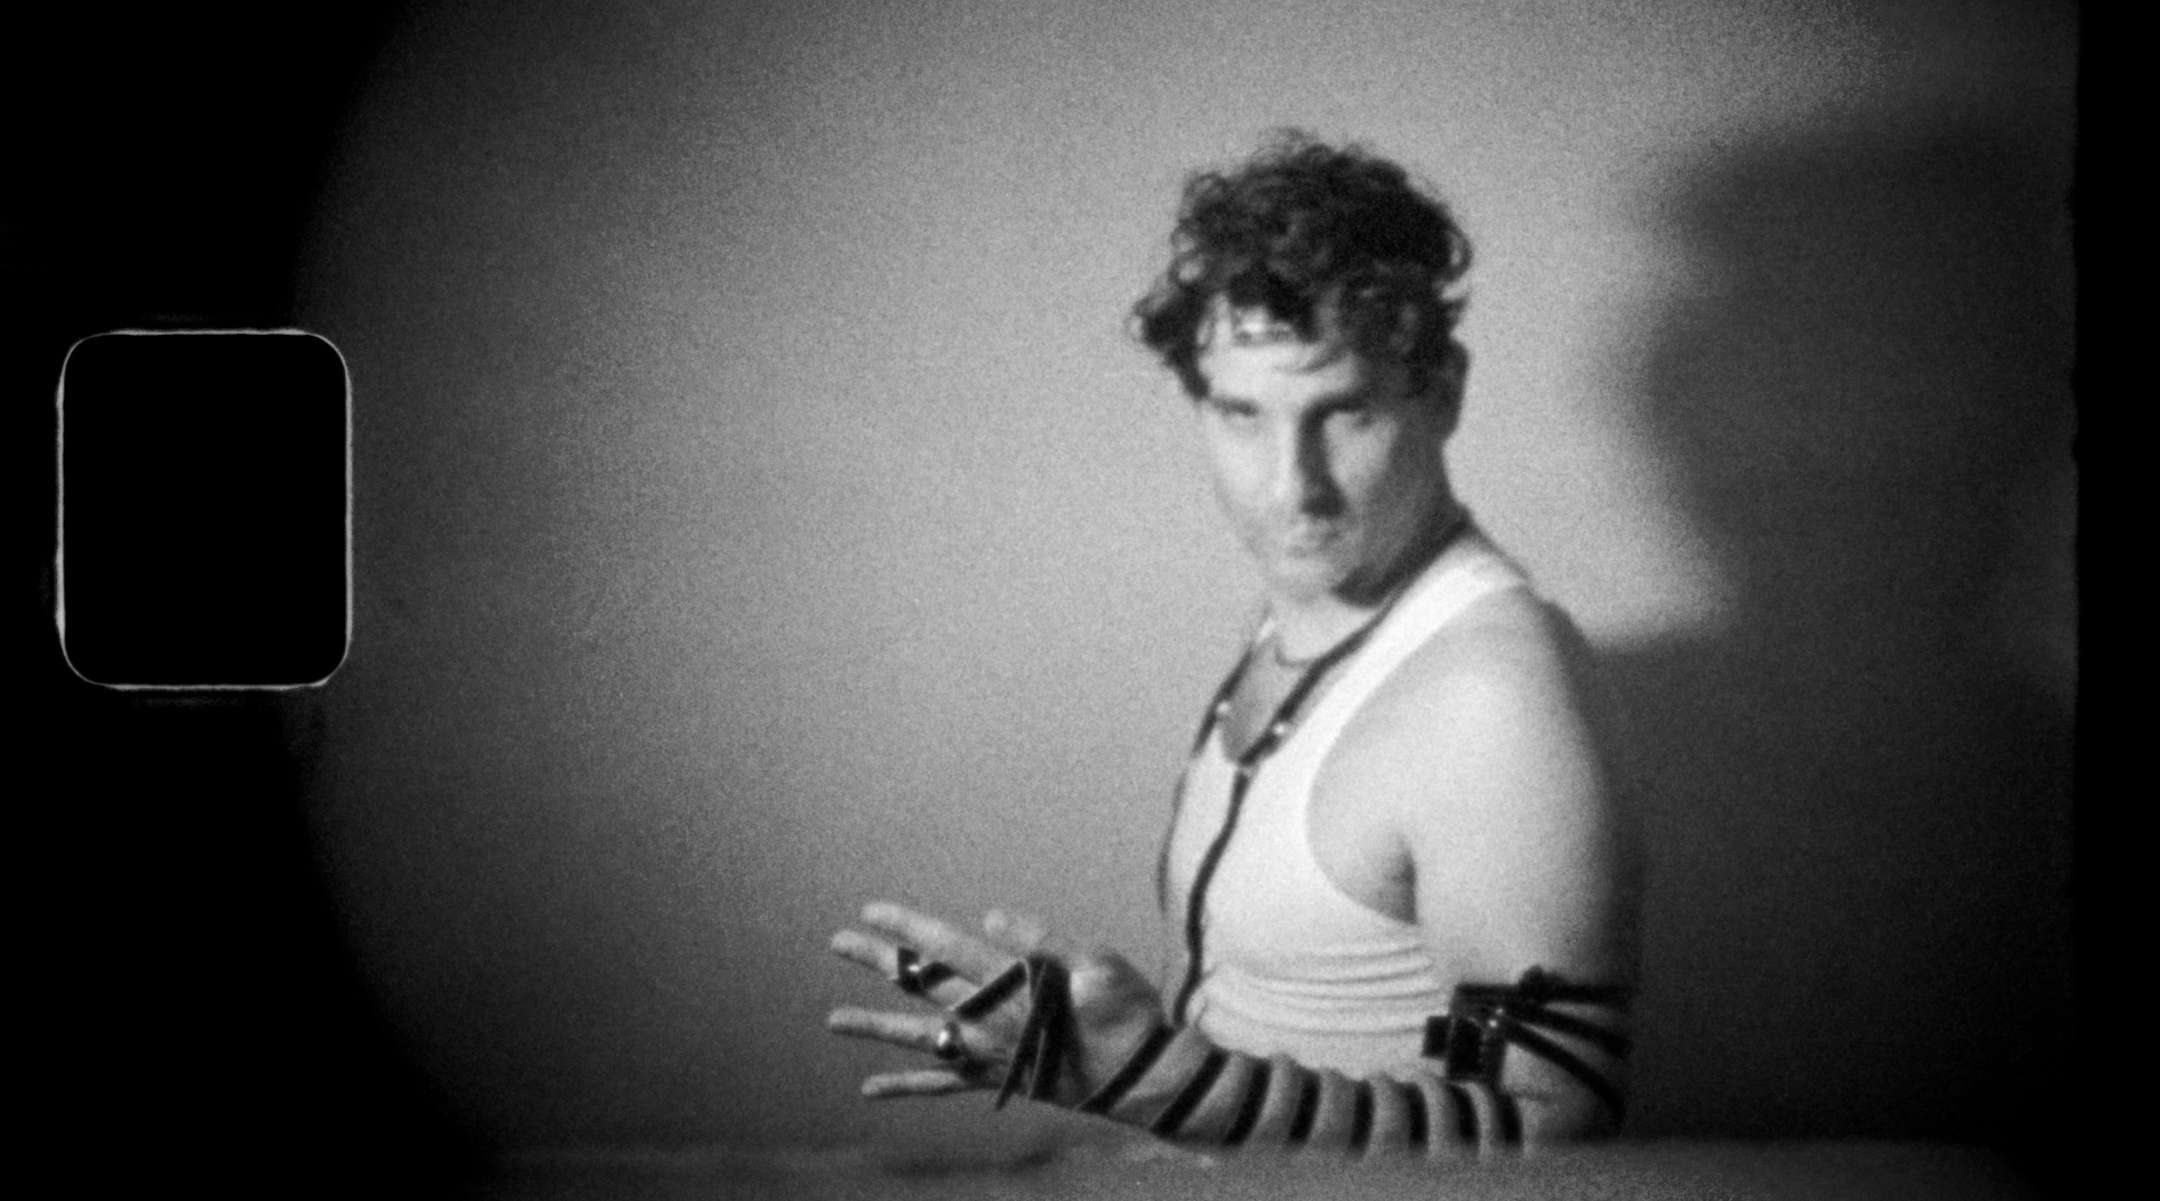 Adam Weiner wraps tefillin in his music video for the Low Cut Connie song “King of the Jews.” (Bob Sweeney)